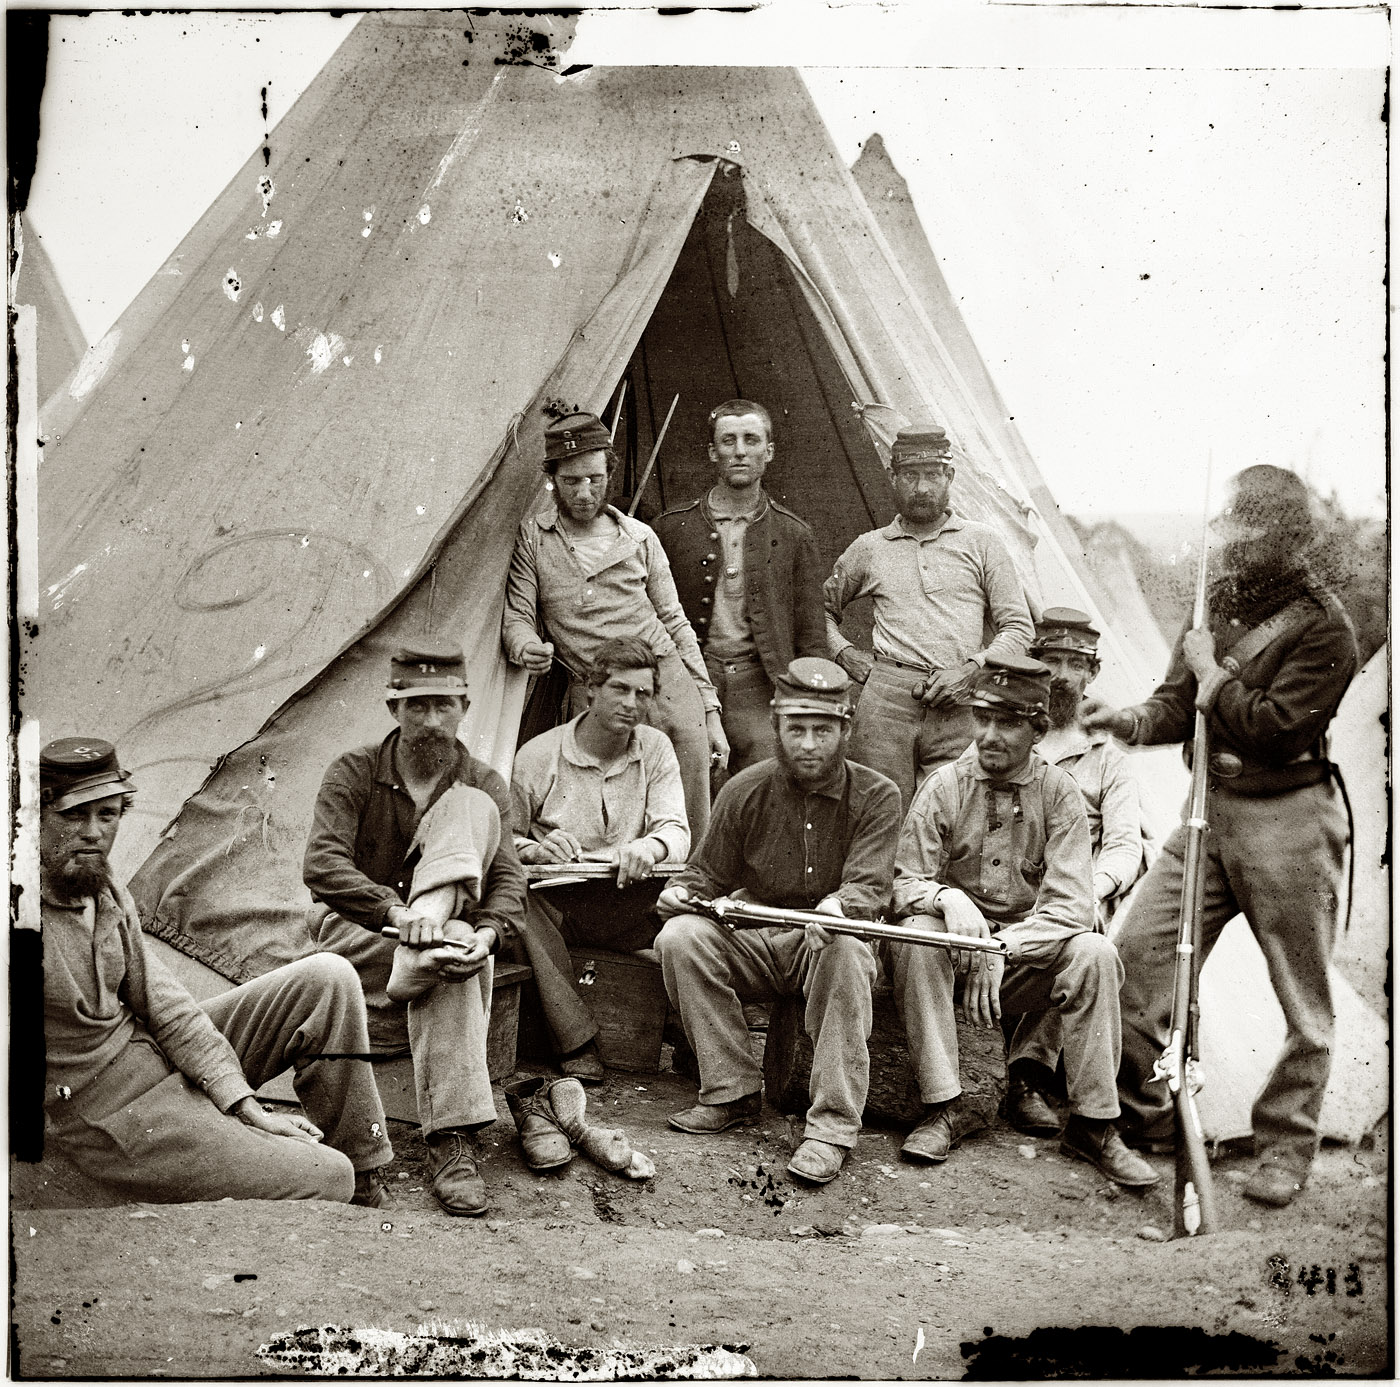 1861. "Soldiers of Company G, 71st New York Volunteers, in front of Sibley tent." Wet plate glass negative, left half of stereograph pair. Photographer unknown. Civil War glass negative collection, Library of Congress. View full size.